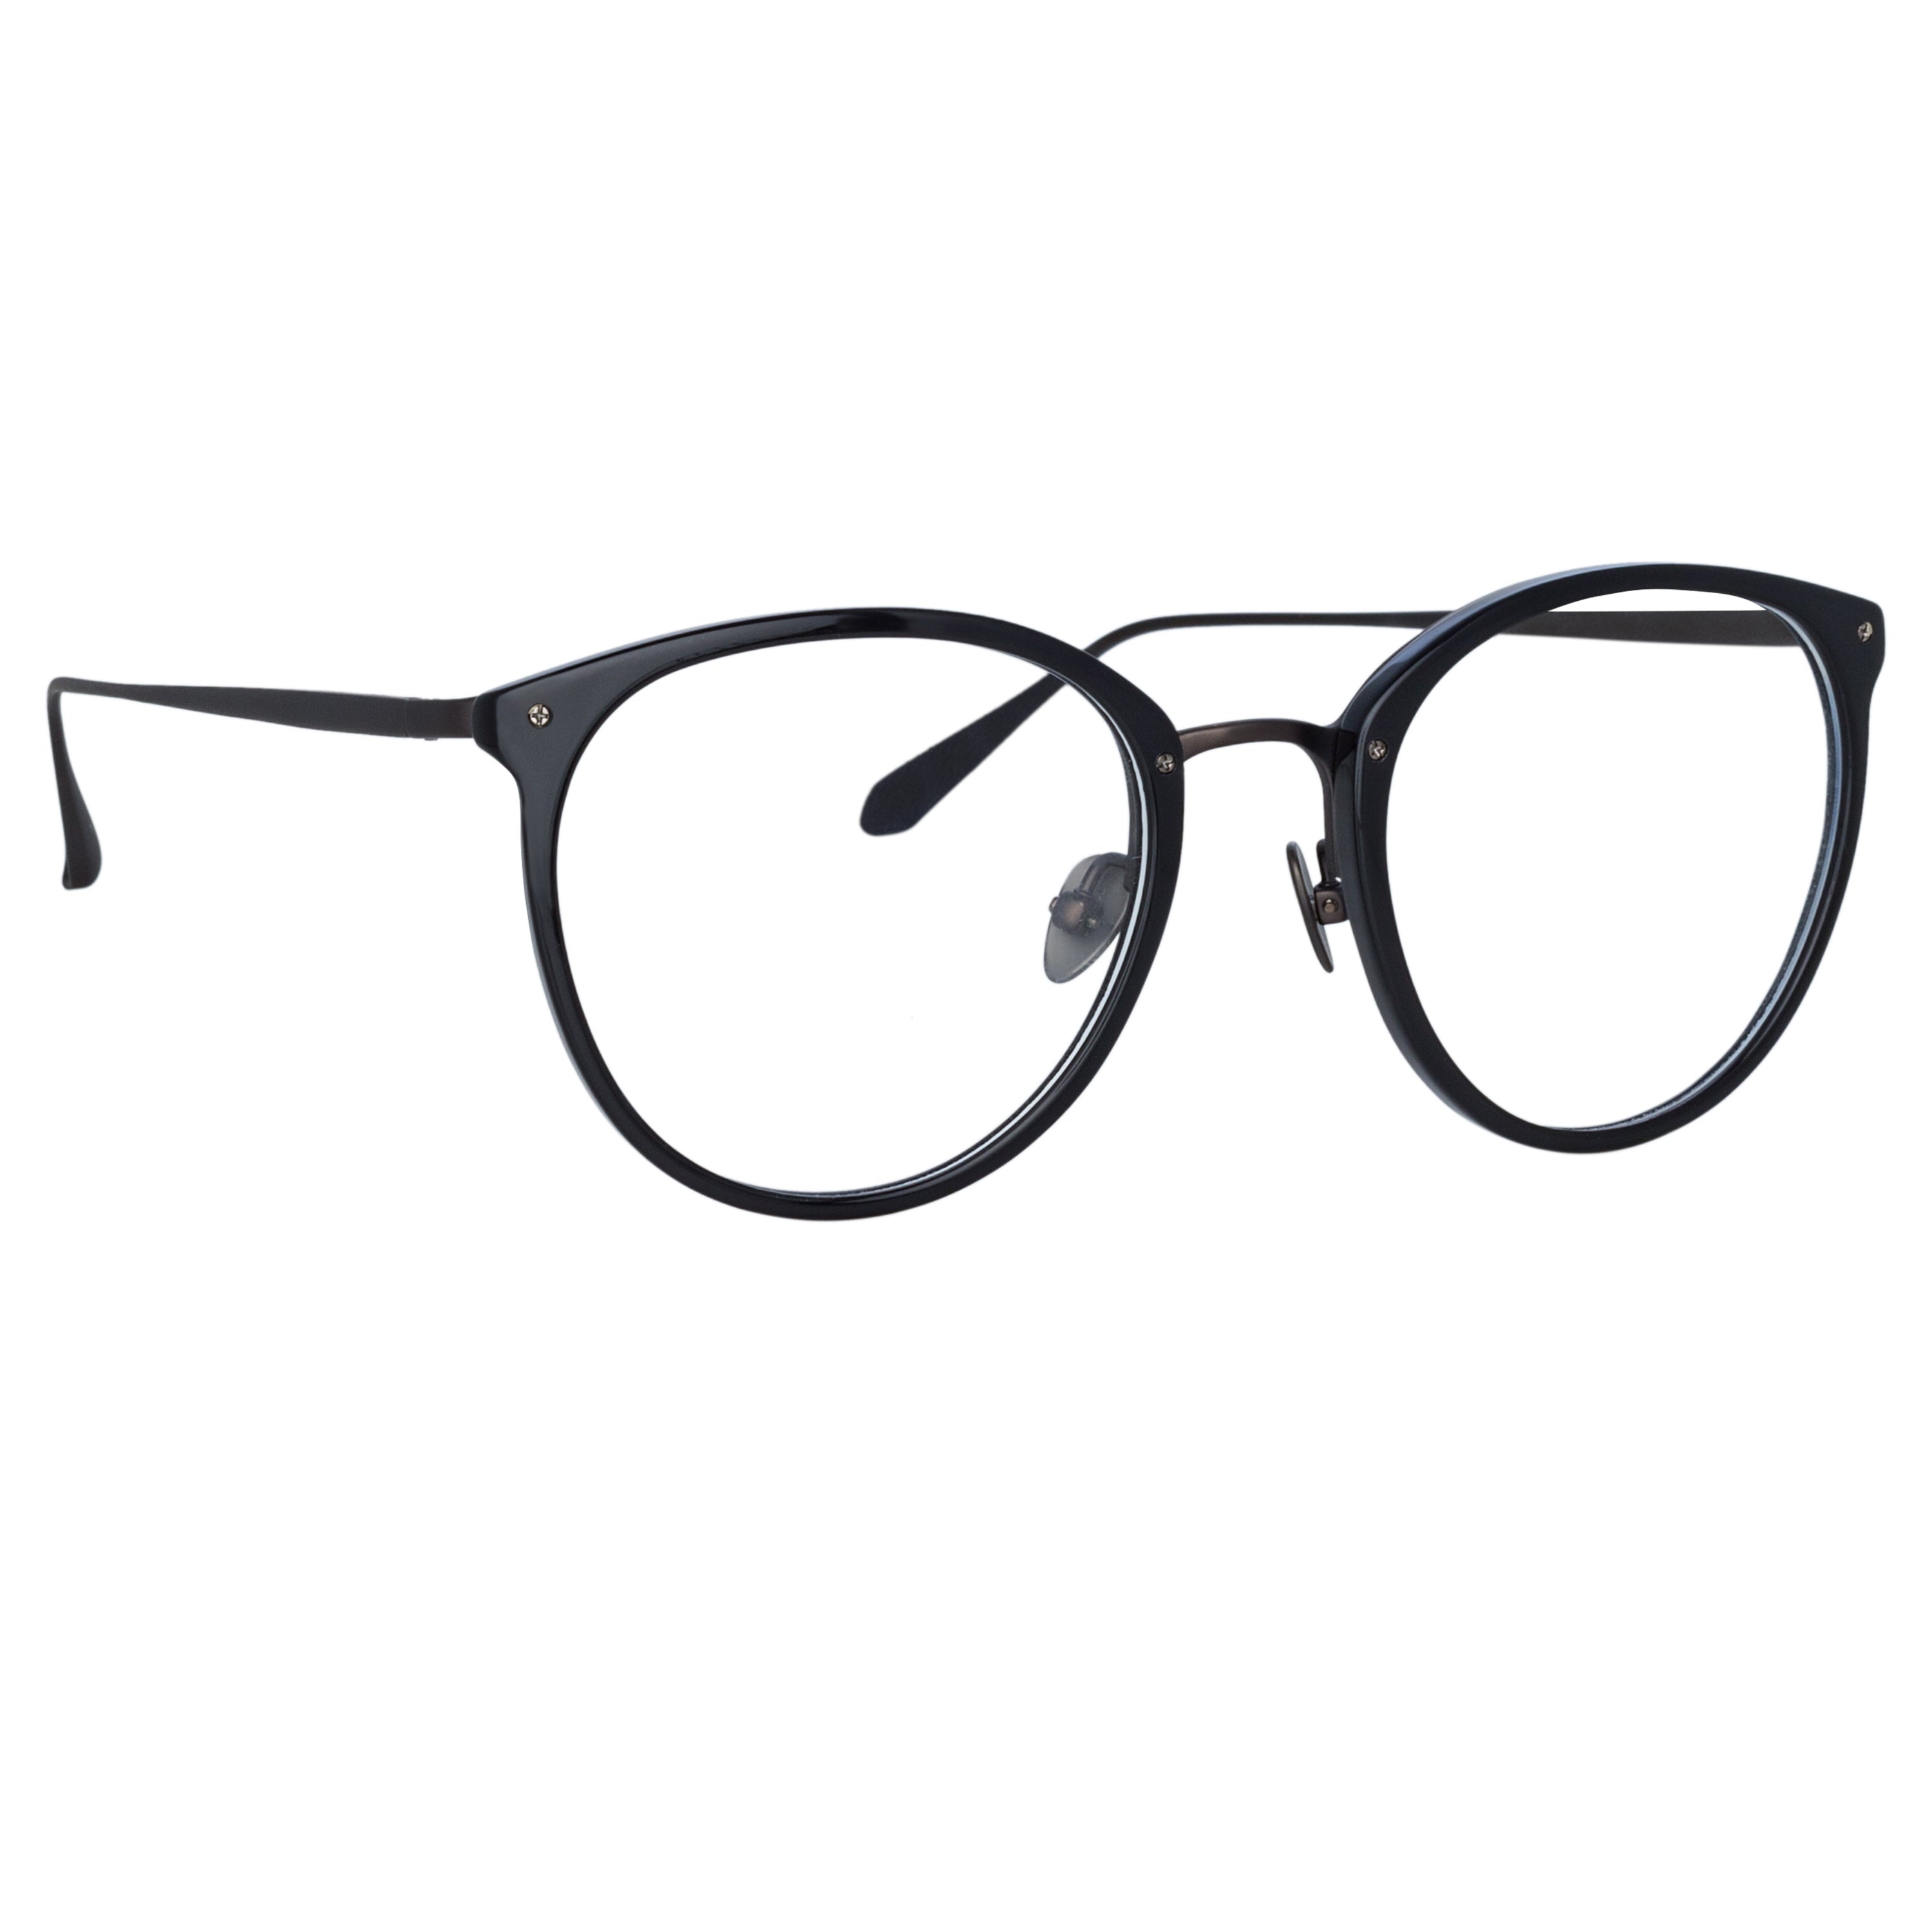 CALTHORPE OVAL OPTICAL FRAME IN BLACK AND NICKEL - 2